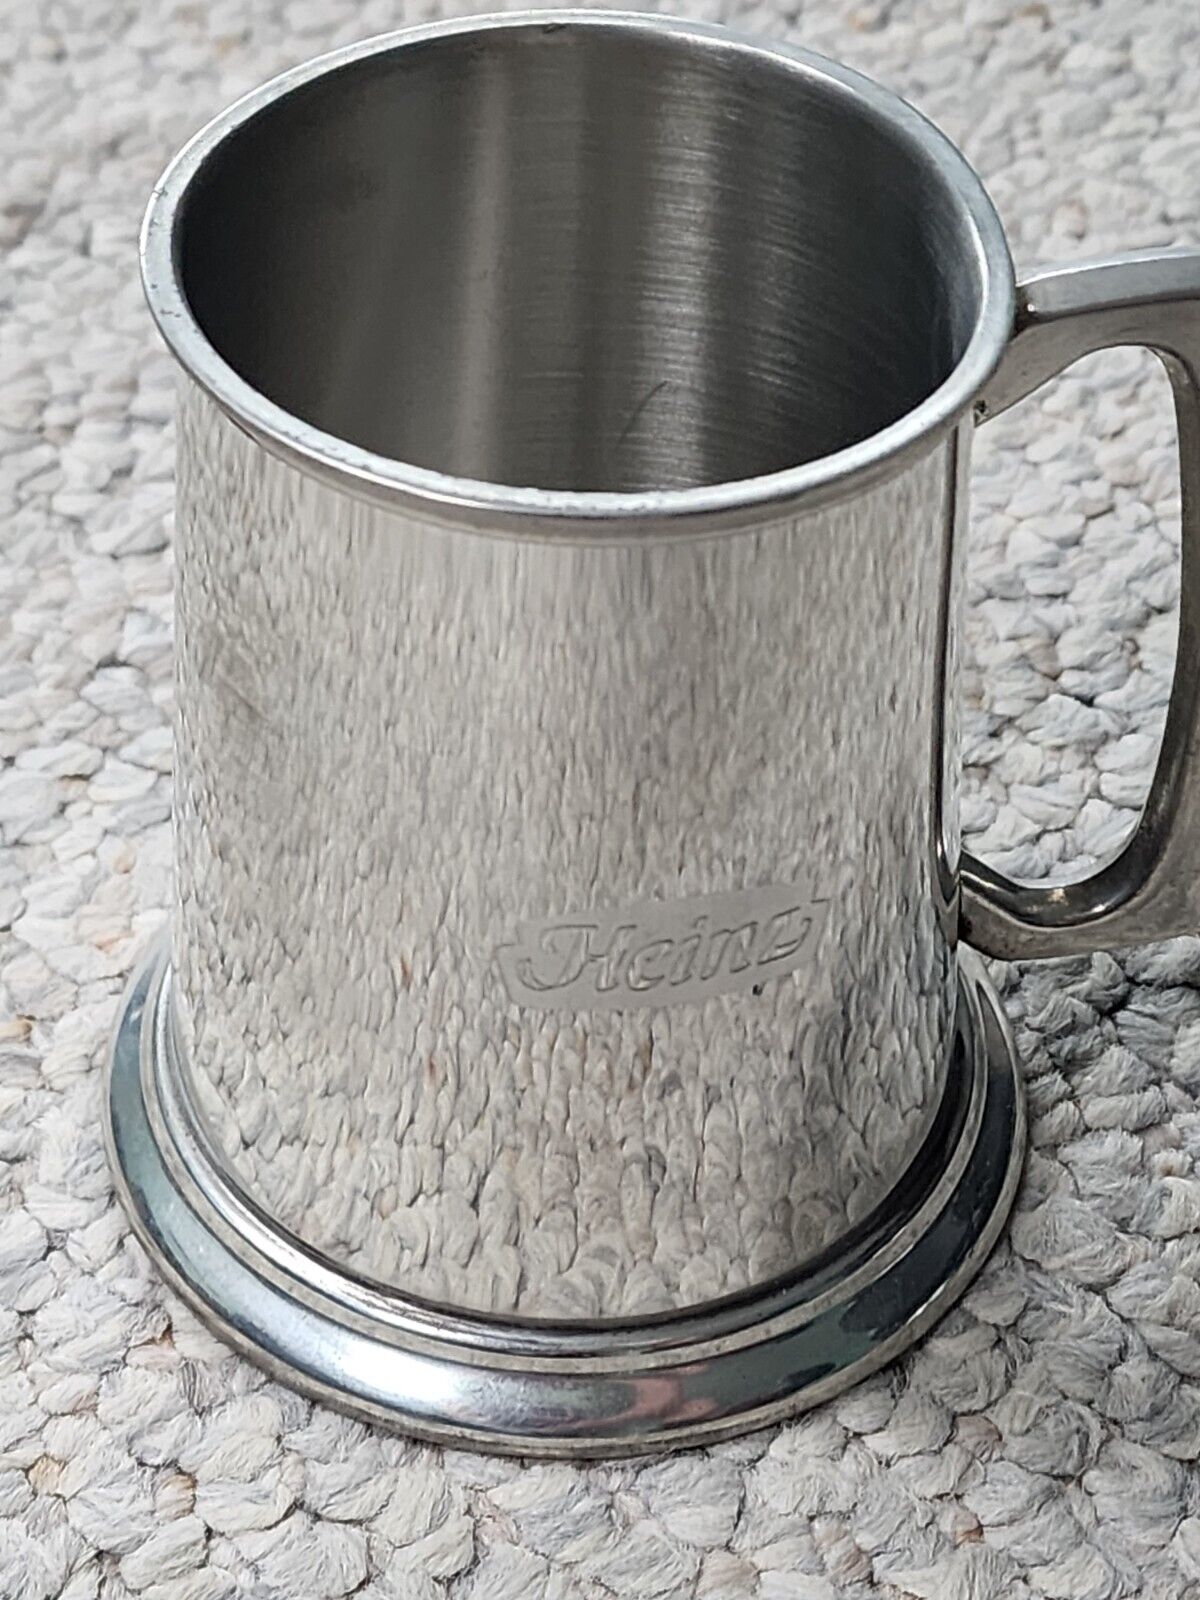 H.J  HEINZ 57 monogrammed Pewter Stein given to employees for 5 year Anniversary